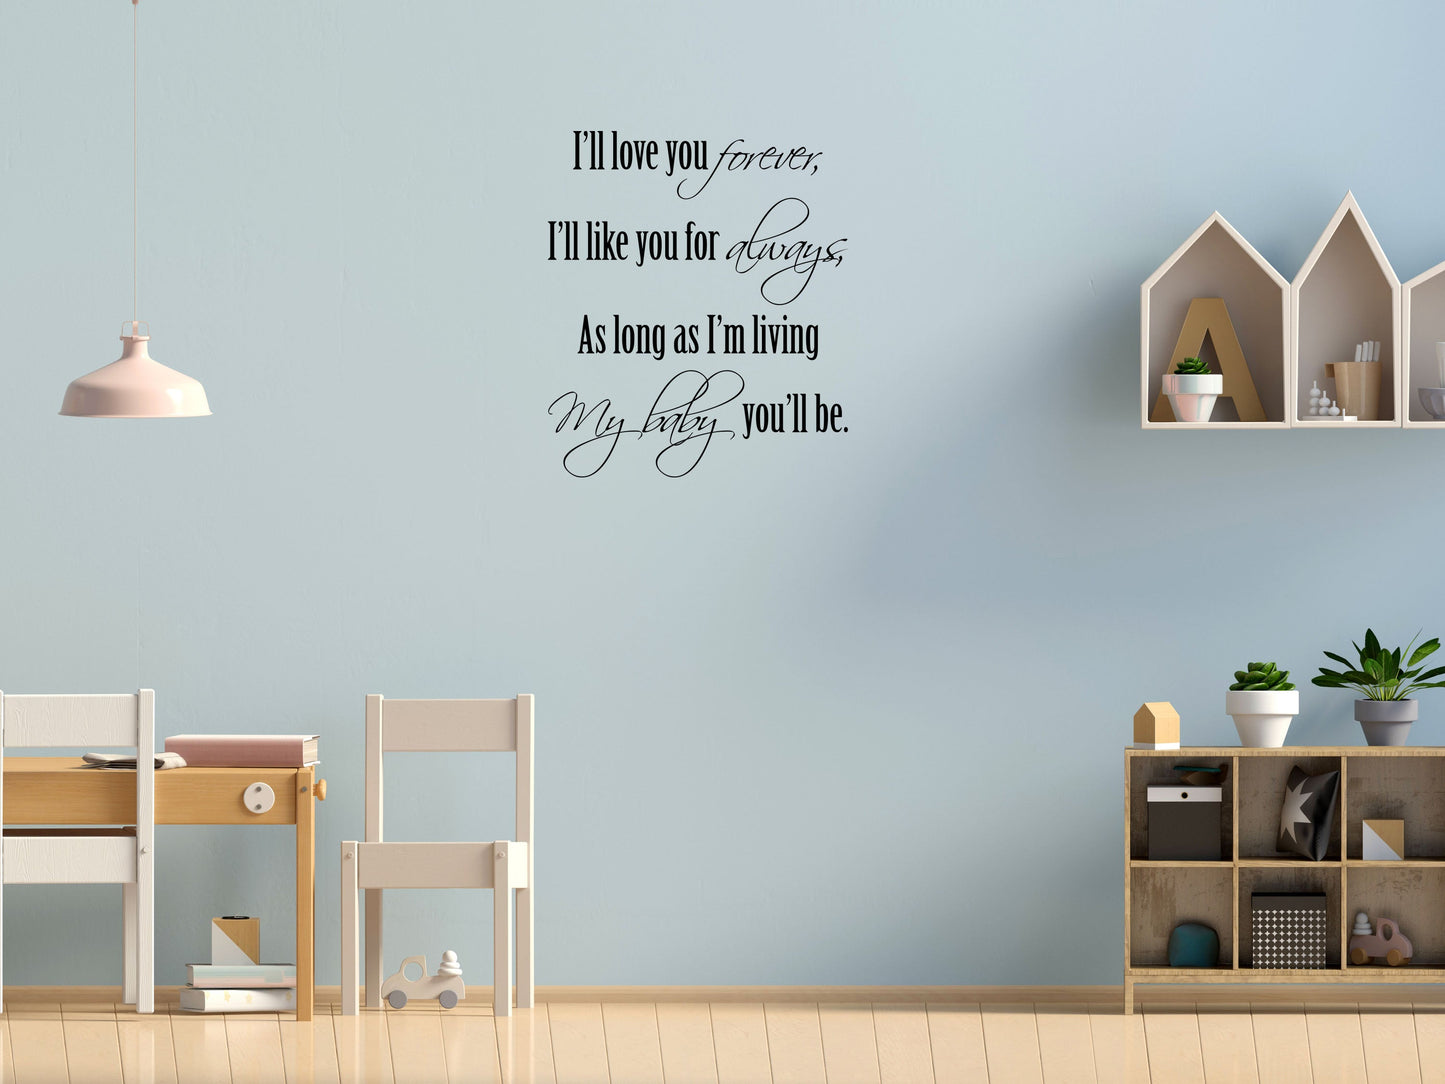 I'll Love You Forever - Christian Wall Art - Wall Decal - Baby Wall Art - Nursery - Kid Wall Decals - Baby Handmade - Nursery Wall Quote Vinyl Wall Decal Inspirational Wall Signs 